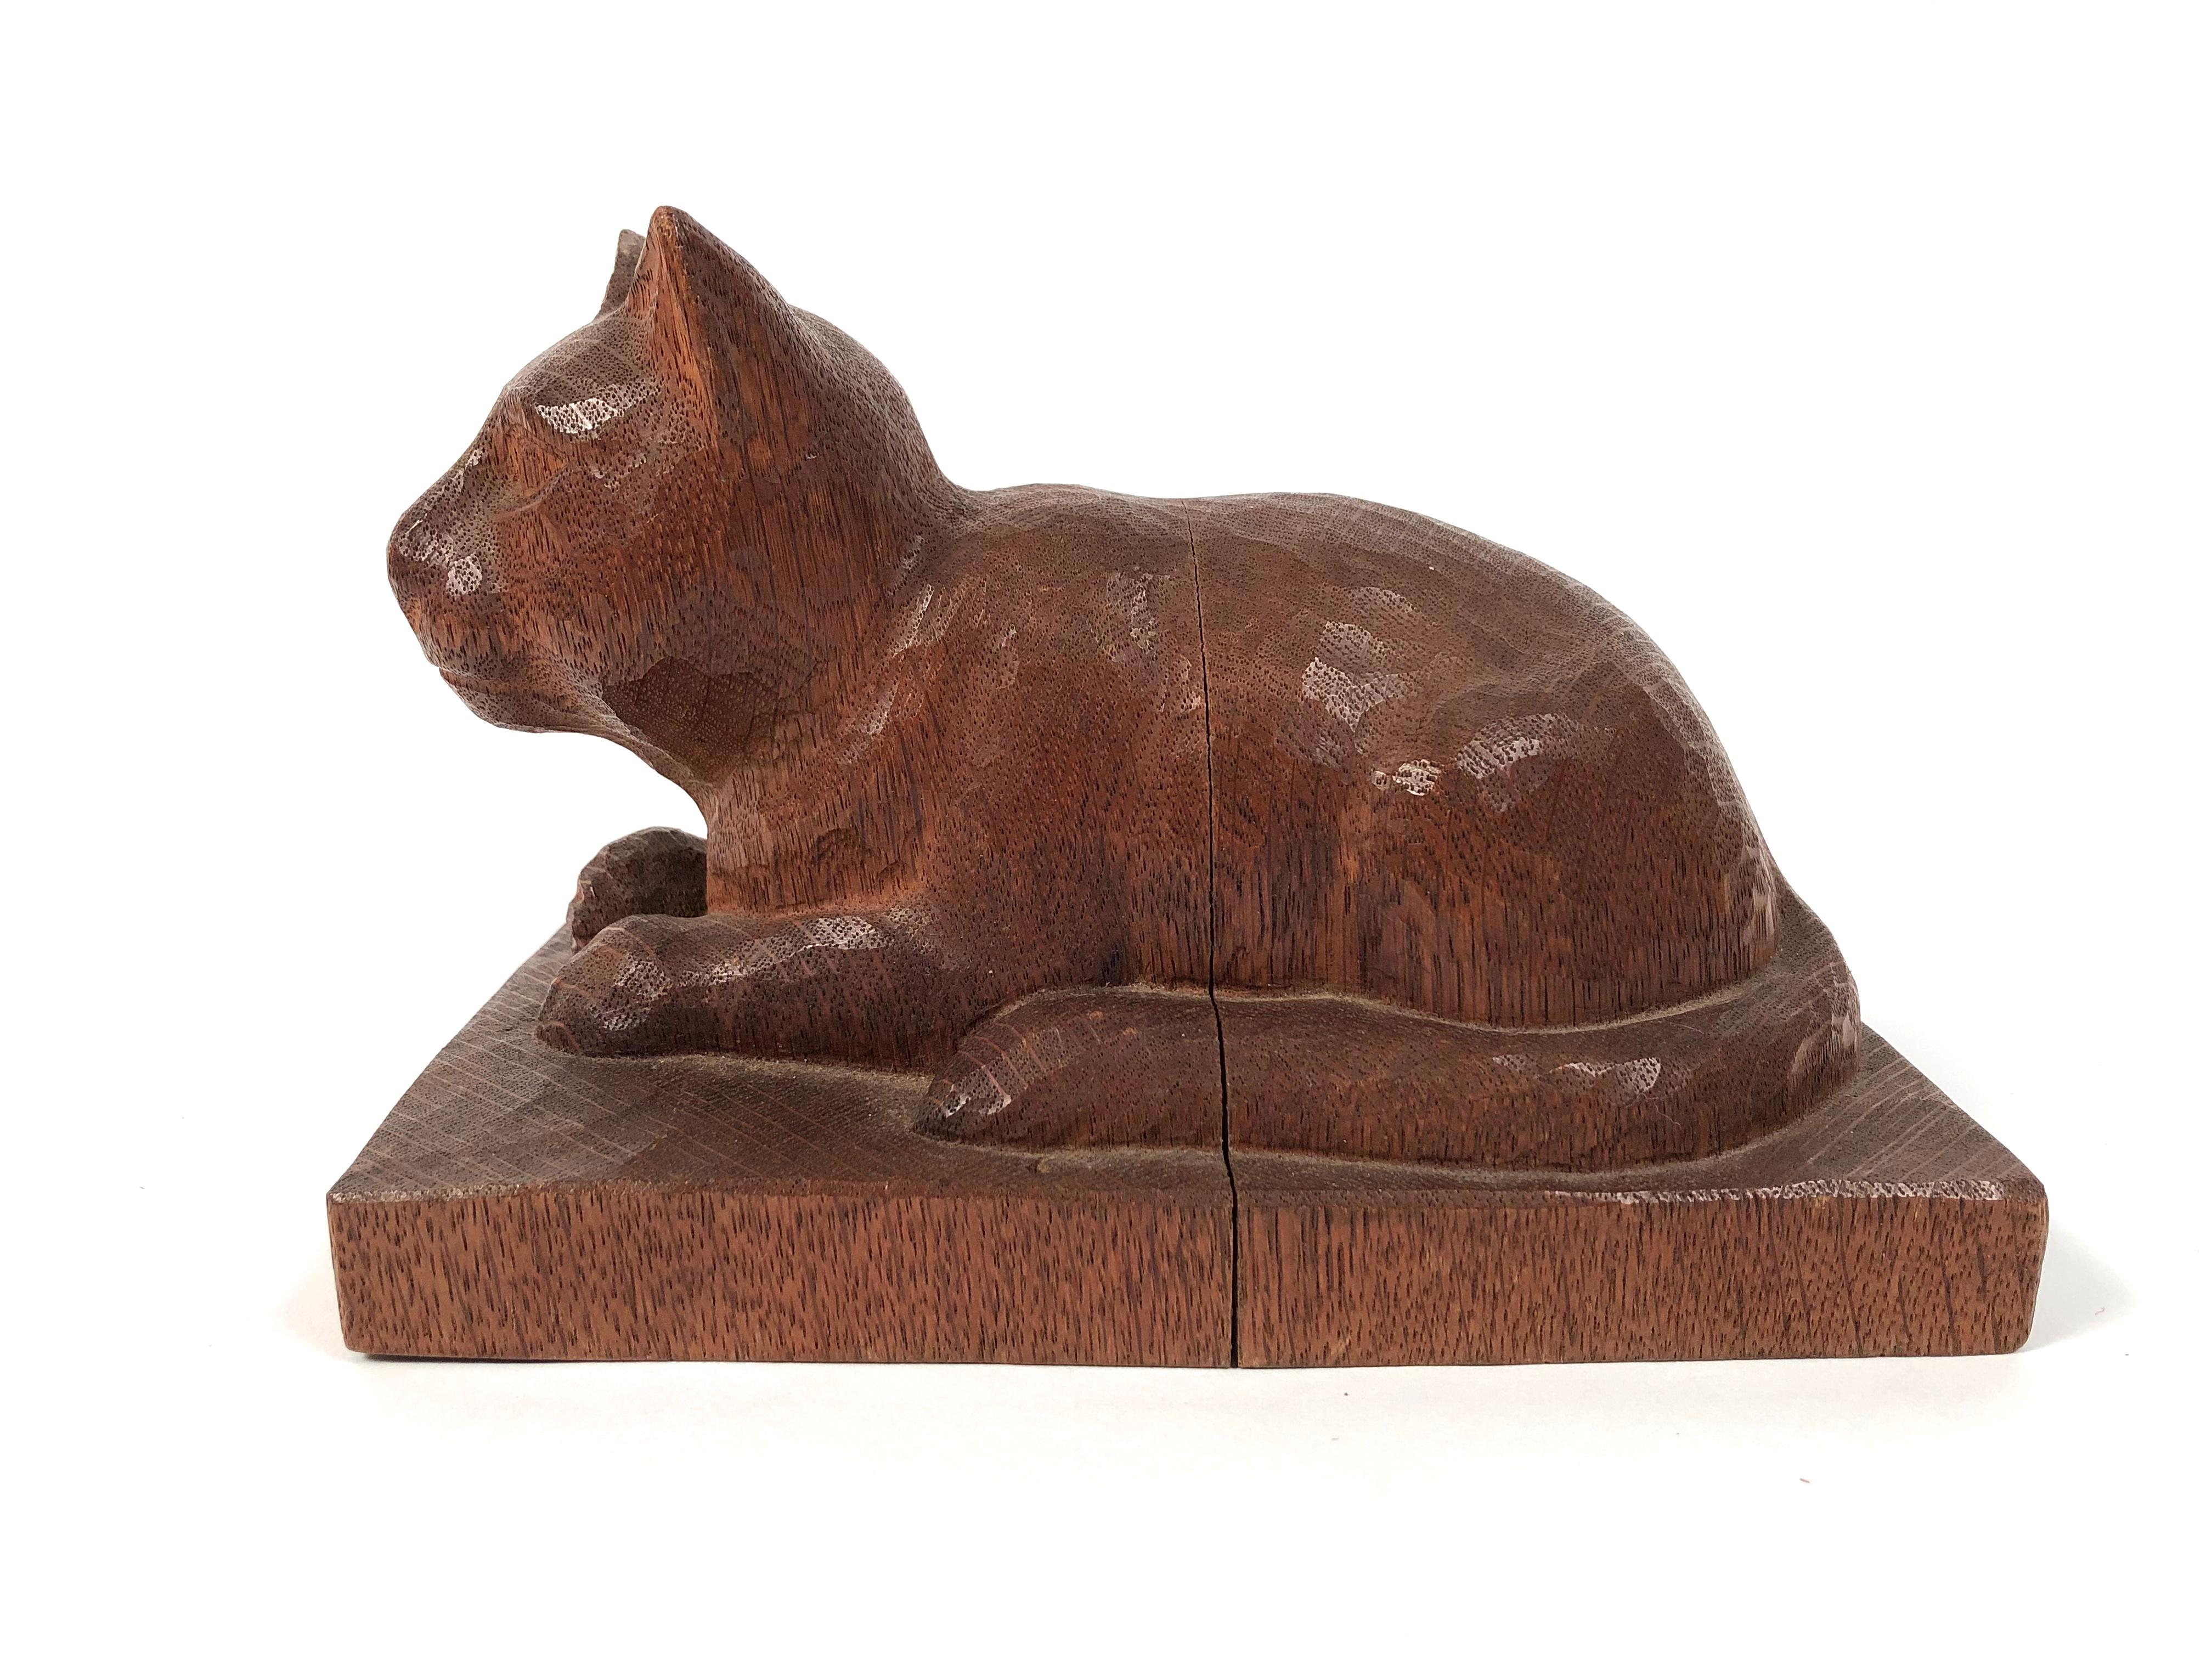 A beautifully hand carved wood folk art sculpture of a cat, in oak, resting, with alert expression, on a rectangular plinth, American, circa 1890-1900.